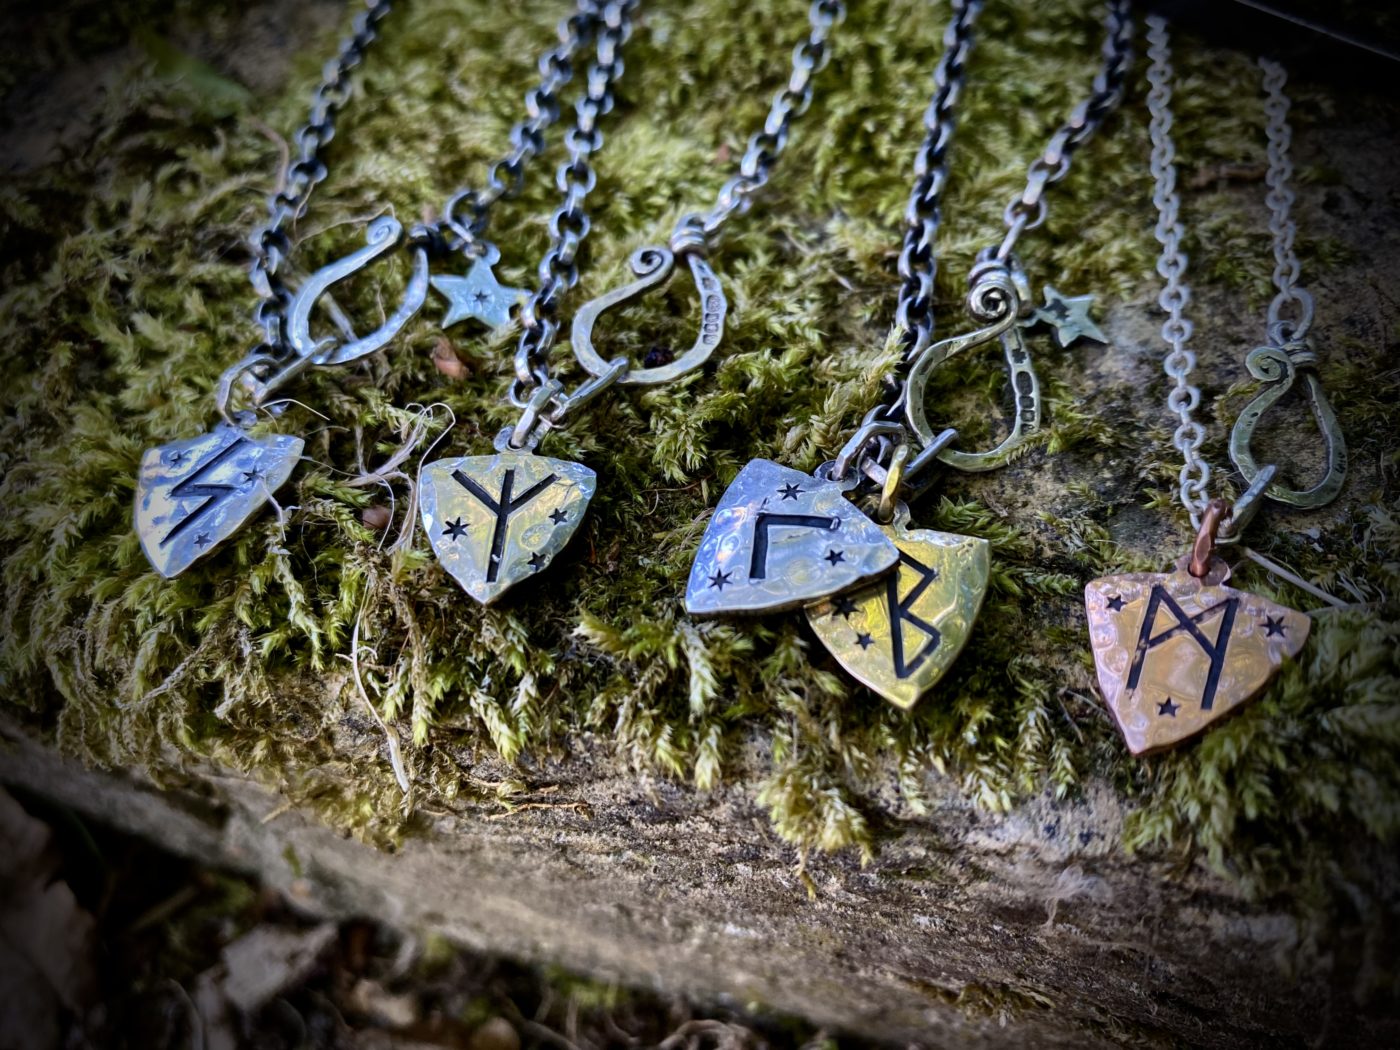 shield rune jewellery designed with love for protection